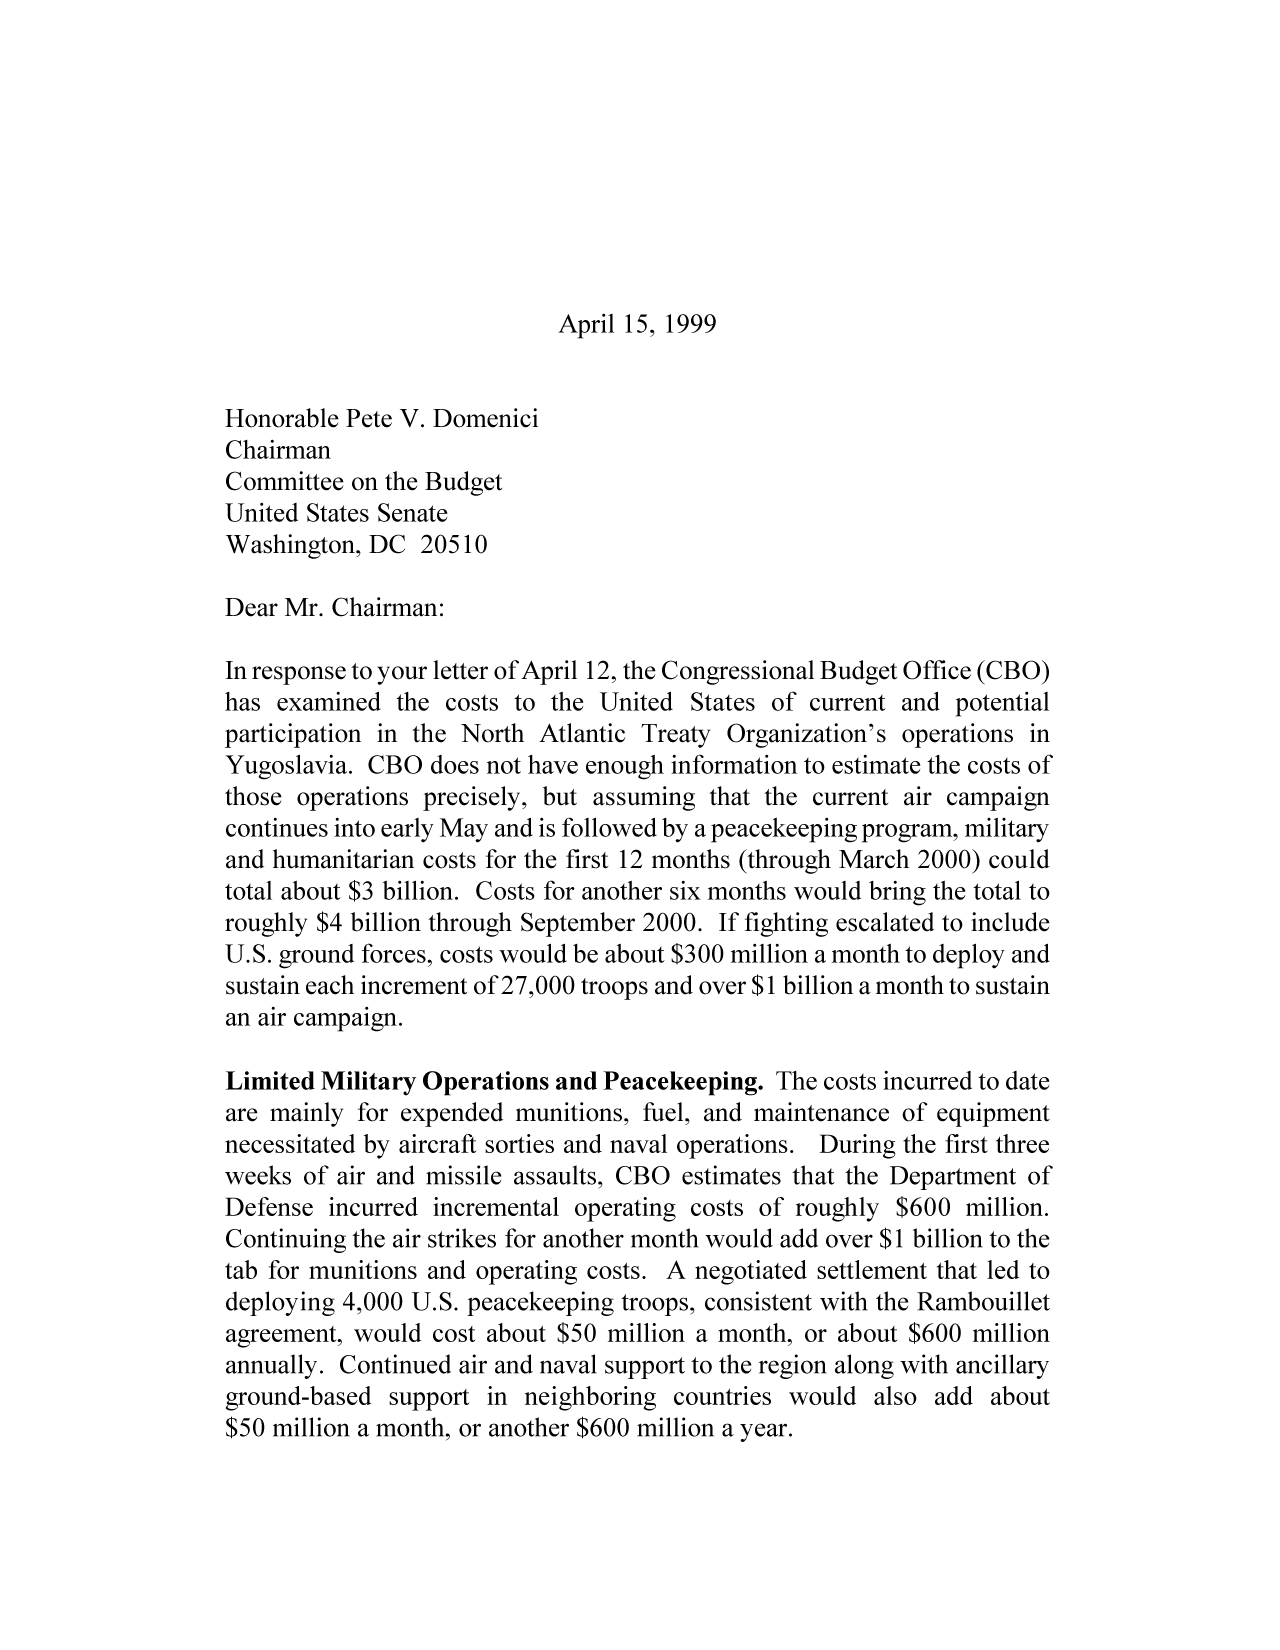 handle is hein.congrec/cbo9848 and id is 1 raw text is: April 15, 1999

Honorable Pete V. Domenici
Chairman
Committee on the Budget
United States Senate
Washington, DC 20510
Dear Mr. Chairman:
In response to your letter of April 12, the Congressional Budget Office (CBO)
has examined the costs to the United States of current and potential
participation in the North Atlantic Treaty Organization's operations in
Yugoslavia. CBO does not have enough information to estimate the costs of
those operations precisely, but assuming that the current air campaign
continues into early May and is followed by a peacekeeping program, military
and humanitarian costs for the first 12 months (through March 2000) could
total about $3 billion. Costs for another six months would bring the total to
roughly $4 billion through September 2000. If fighting escalated to include
U.S. ground forces, costs would be about $300 million a month to deploy and
sustain each increment of 27,000 troops and over $1 billion a month to sustain
an air campaign.
Limited Military Operations and Peacekeeping. The costs incurred to date
are mainly for expended munitions, fuel, and maintenance of equipment
necessitated by aircraft sorties and naval operations. During the first three
weeks of air and missile assaults, CBO estimates that the Department of
Defense incurred incremental operating costs of roughly $600 million.
Continuing the air strikes for another month would add over $1 billion to the
tab for munitions and operating costs. A negotiated settlement that led to
deploying 4,000 U.S. peacekeeping troops, consistent with the Rambouillet
agreement, would cost about $50 million a month, or about $600 million
annually. Continued air and naval support to the region along with ancillary
ground-based support in neighboring countries would also add about
$50 million a month, or another $600 million a year.


